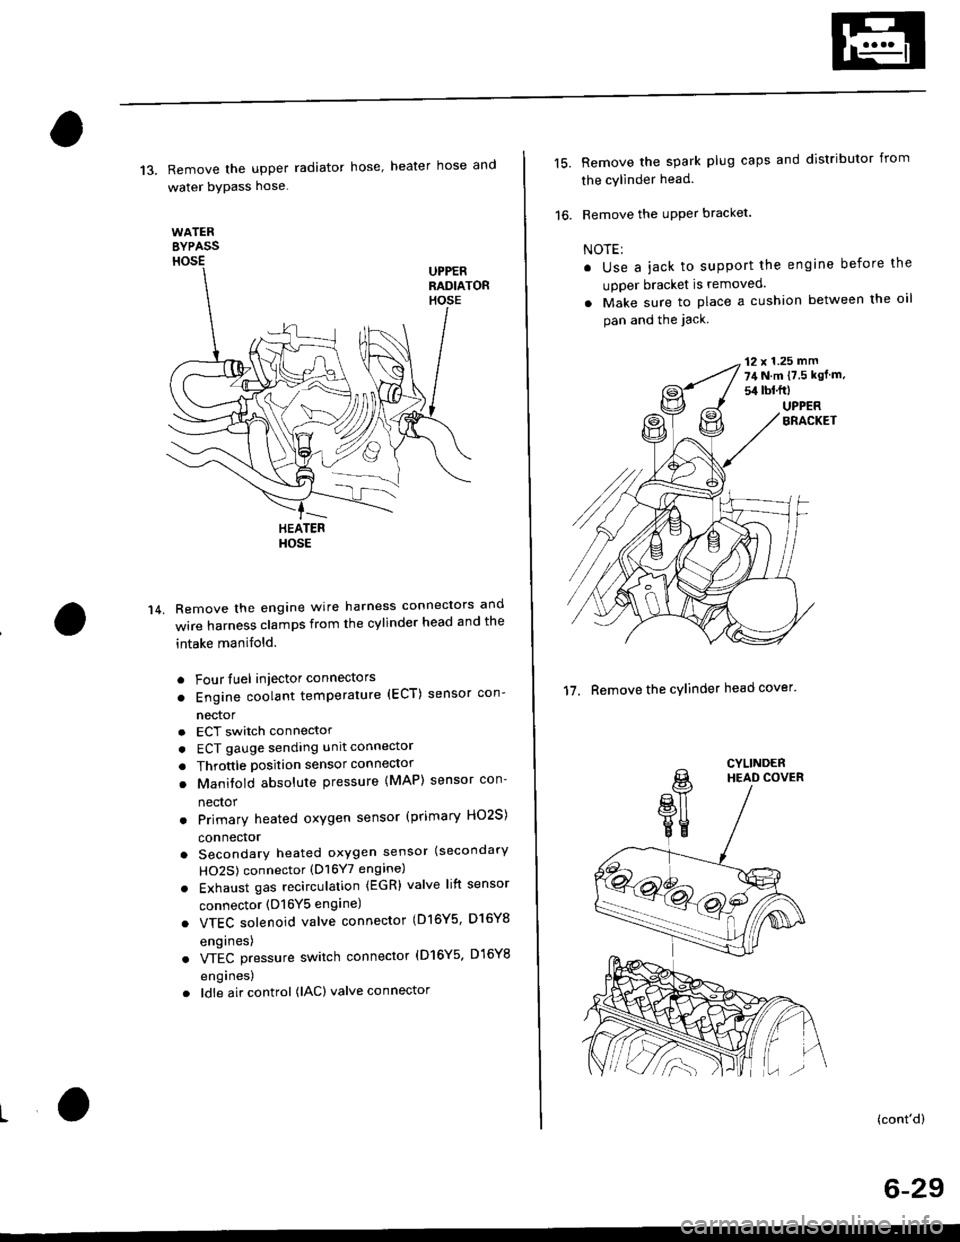 HONDA CIVIC 2000 6.G Workshop Manual 13. Remove the upper radiator hose heater hose and
water bYPass hose
WATEREYPASSHOSEUPPERRADIATORHOSE
14.
HEATERHOSE
Remove the engine wire harness connectors and
wire harness clamps from the cylinde